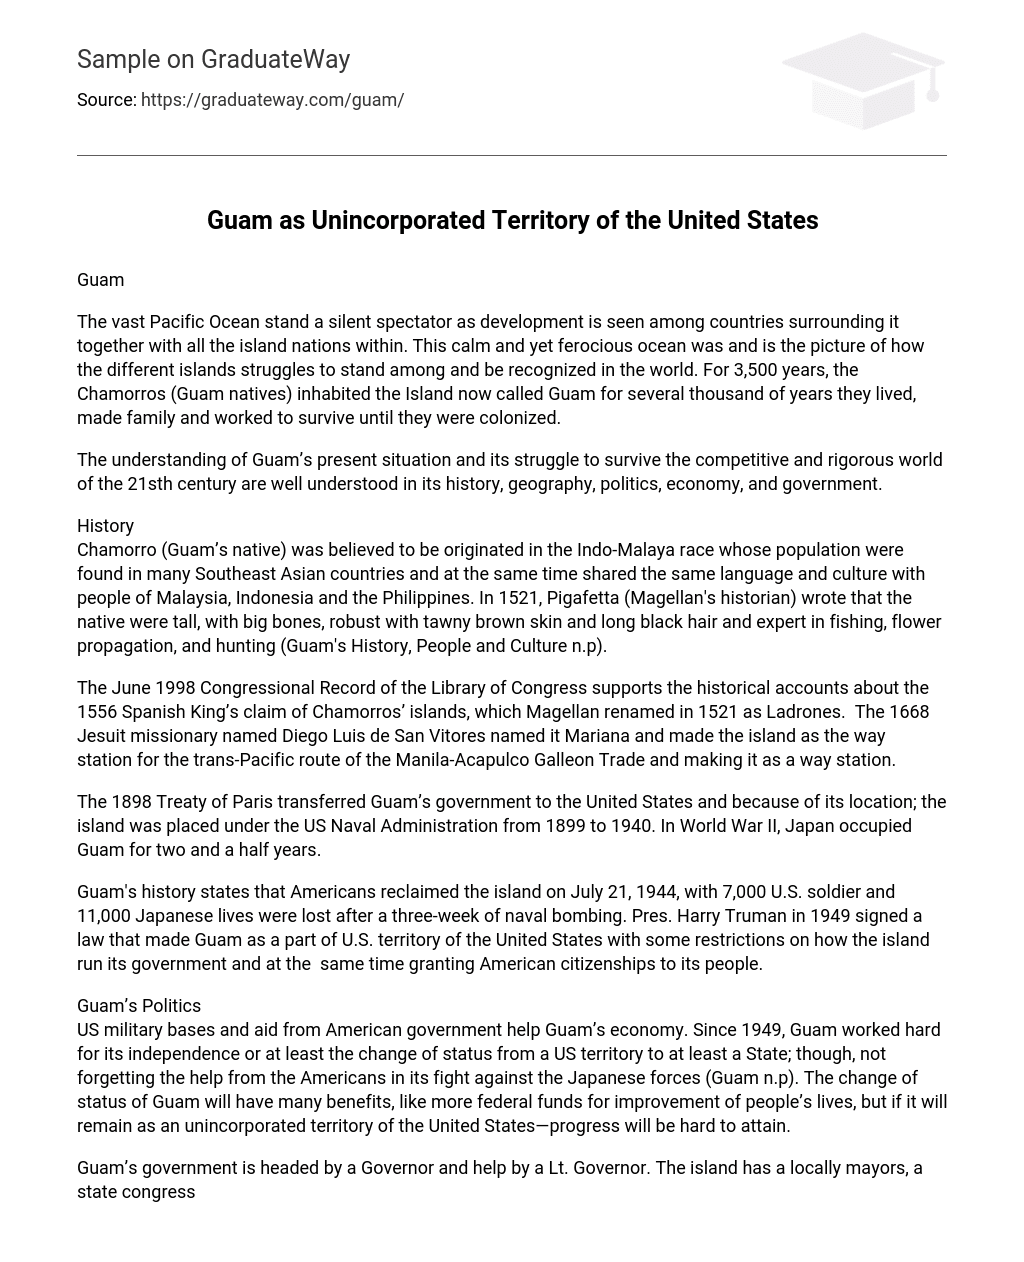 Guam as Unincorporated Territory of the United States